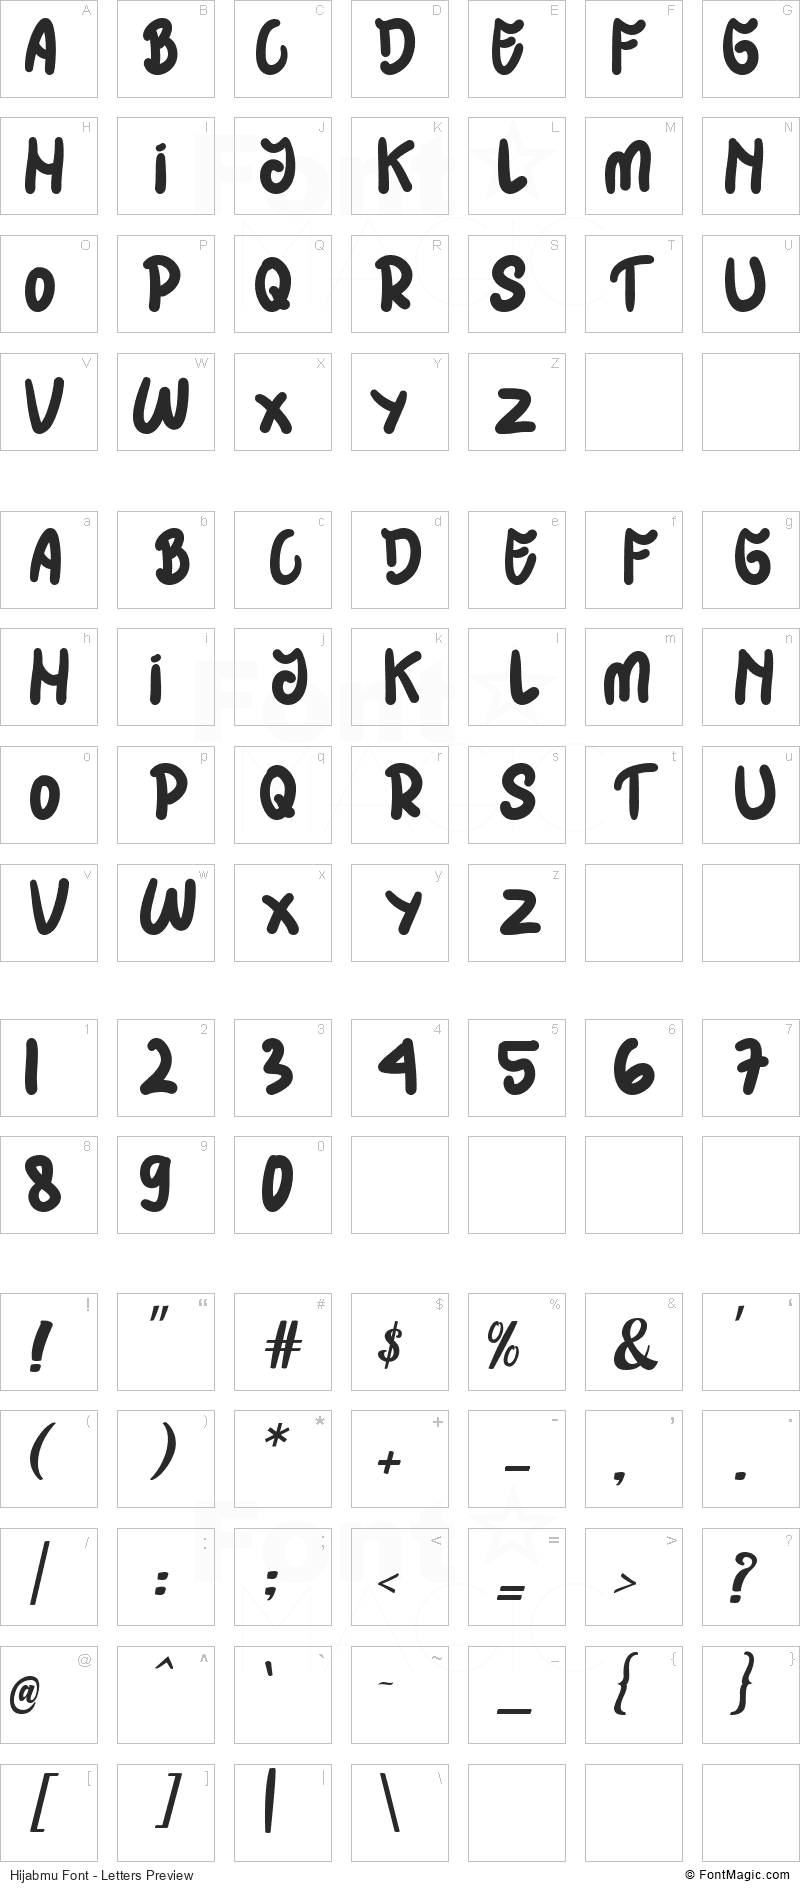 Hijabmu Font - All Latters Preview Chart